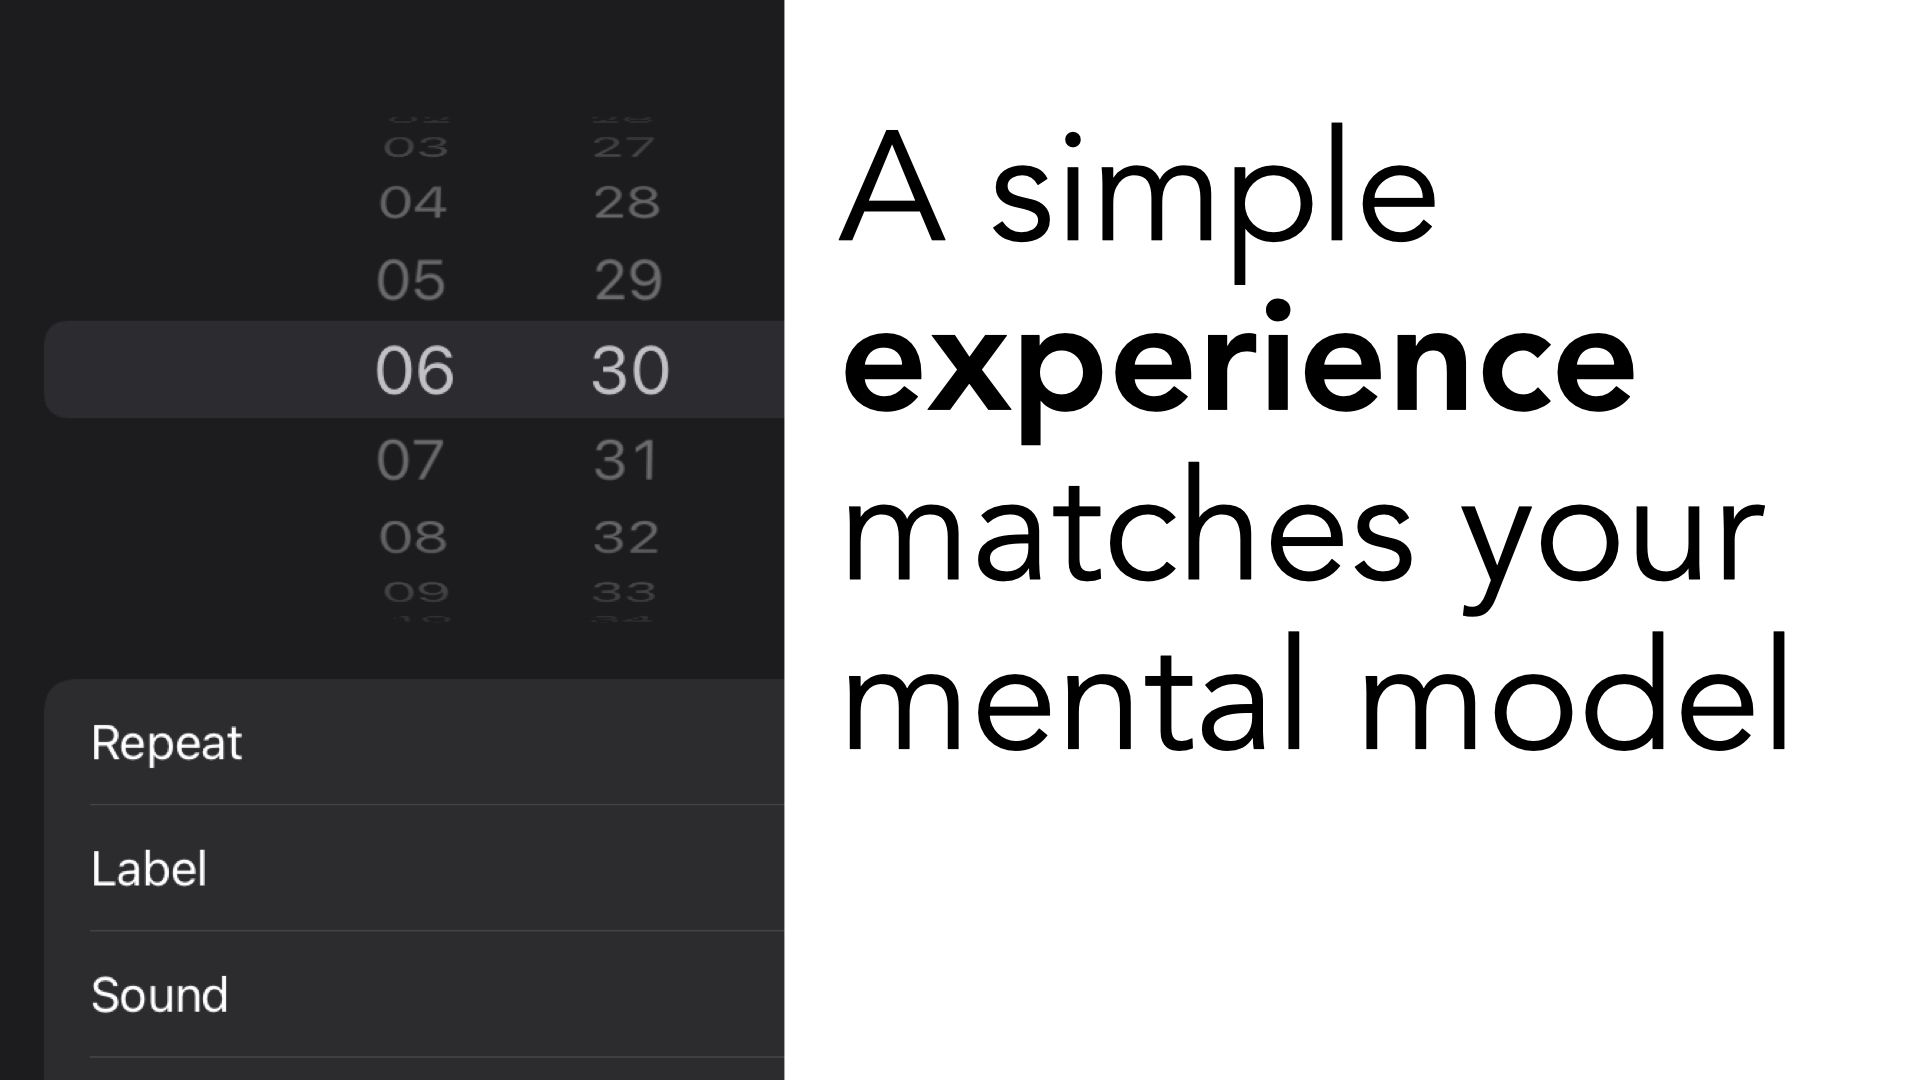 Slide text "A simple experience matches your mental model", with a cropped image of the iPhone set alarm screen to the left